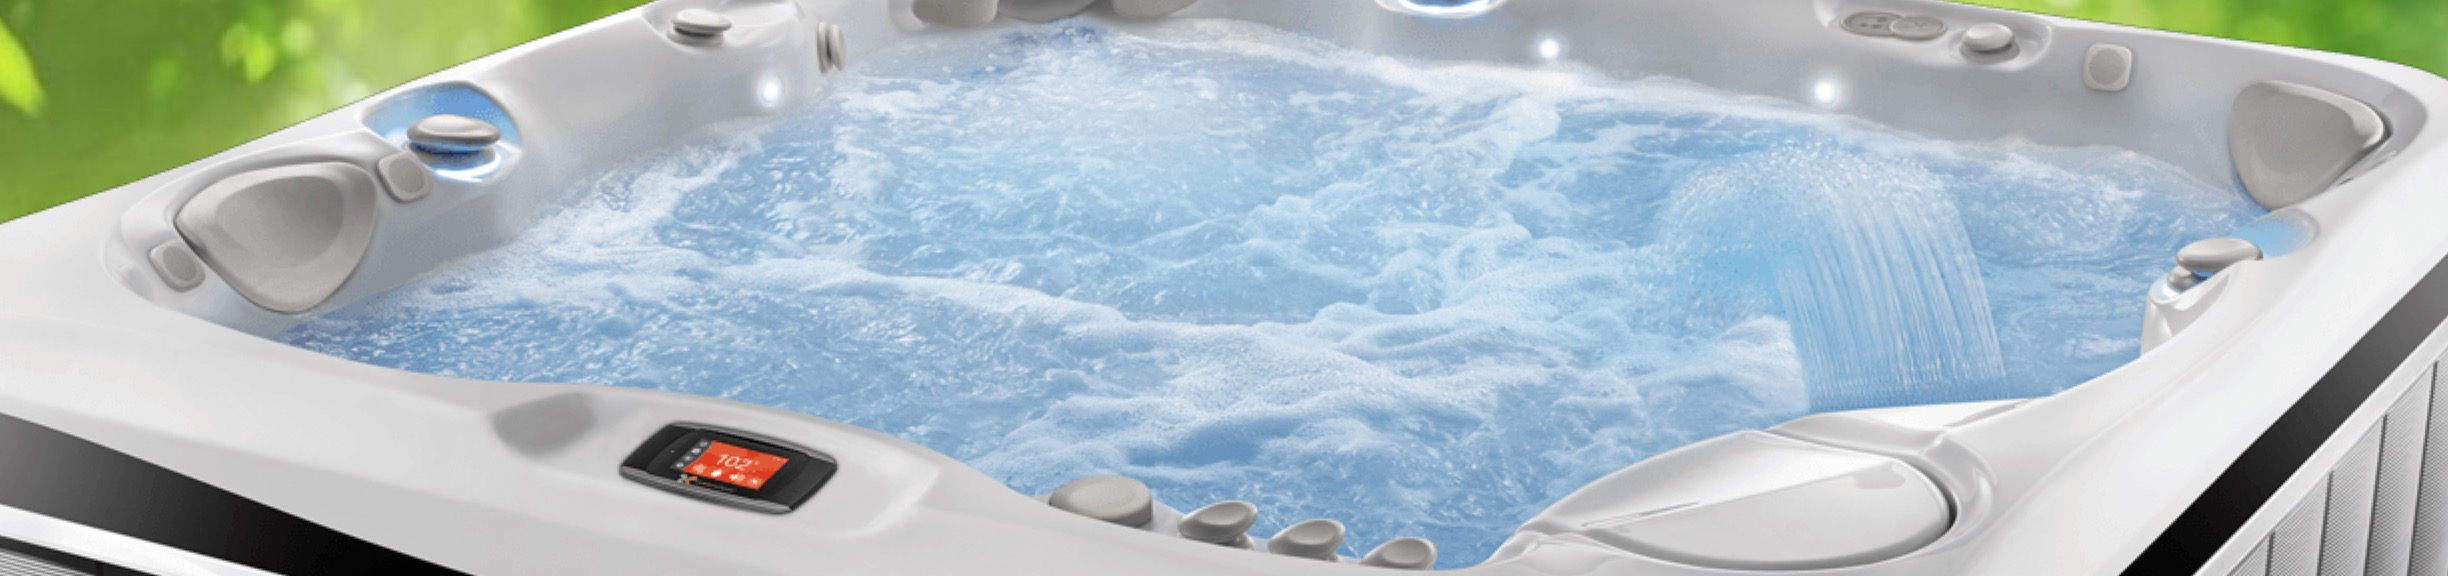 What is the Best Hot Tub Filtration System?